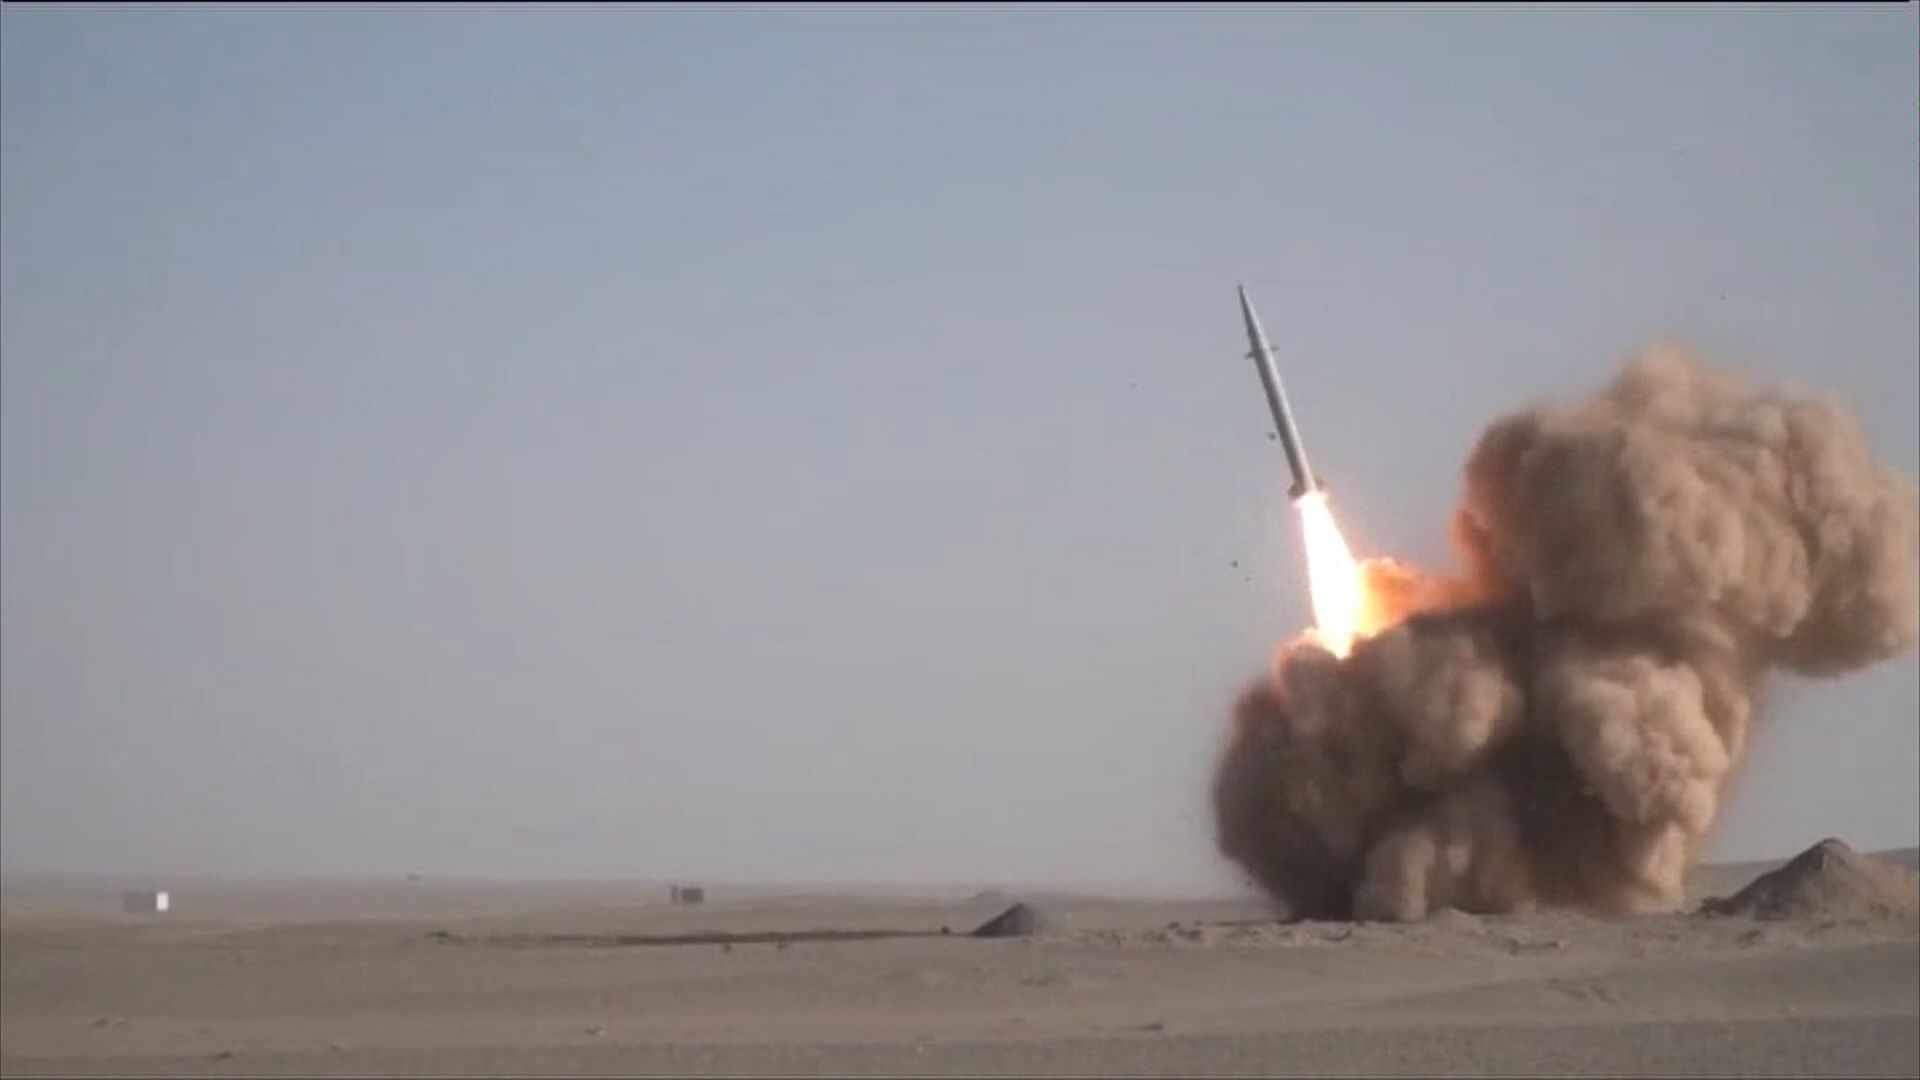 An image grab from footage obtained from the state-run Iran Press news agency on February 9, 2020 shows the launch of the new Raad-500 missile, a short-range ballistic missile by Iran's Islamic Revolutionary Guard Corps (IRGC) that they say can be powered by a "new generation" of engines designed to put satellites into orbit. (AFP Photo)